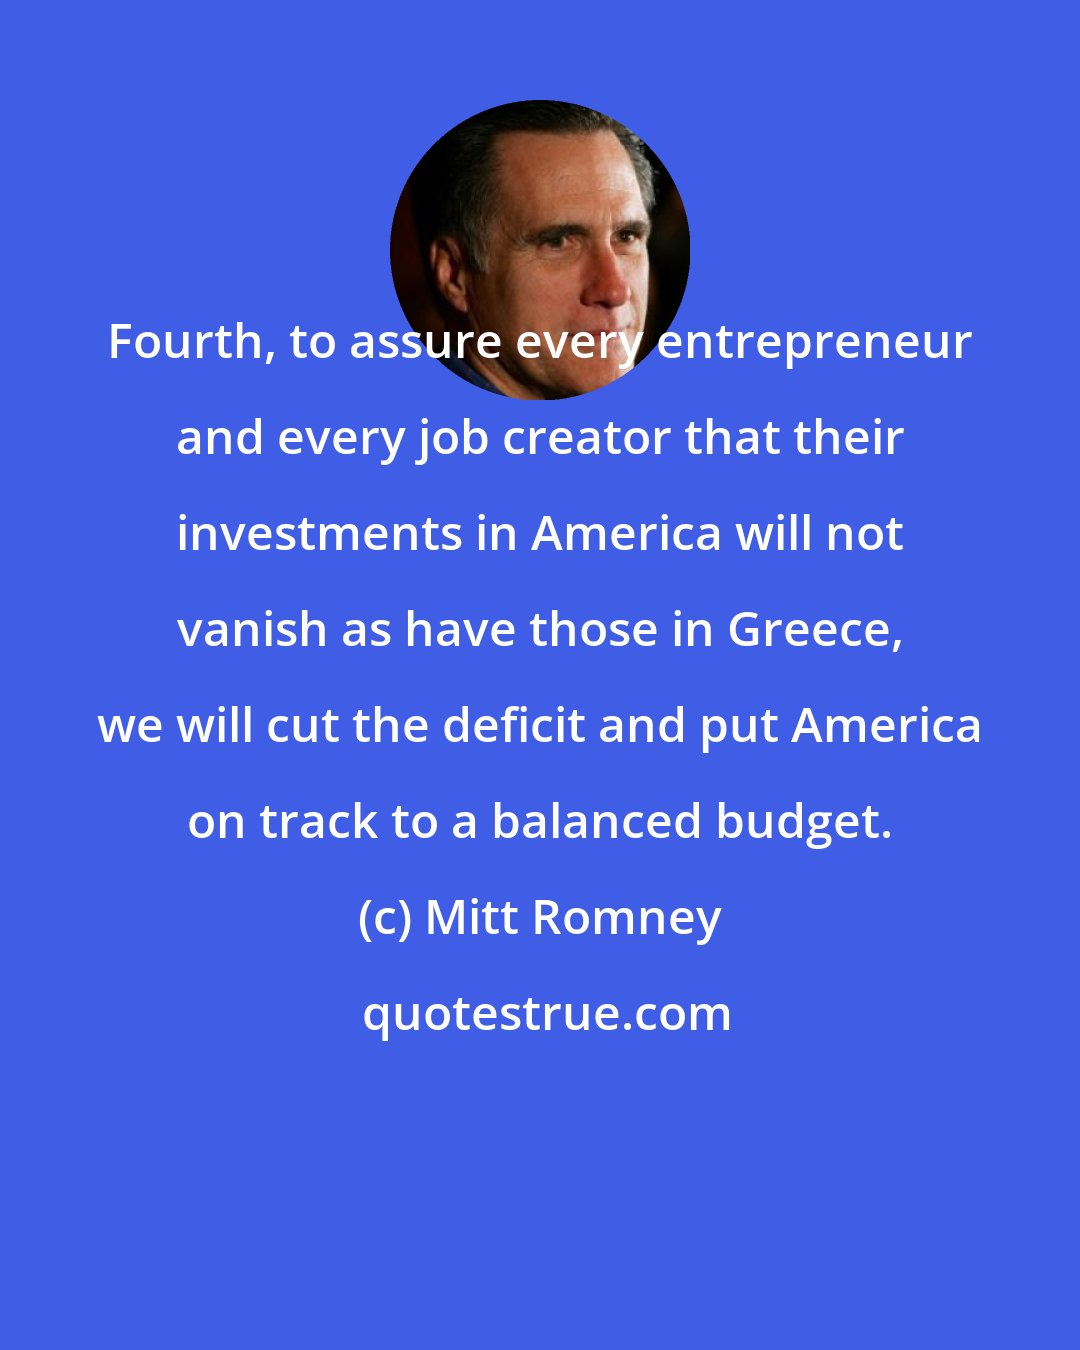 Mitt Romney: Fourth, to assure every entrepreneur and every job creator that their investments in America will not vanish as have those in Greece, we will cut the deficit and put America on track to a balanced budget.